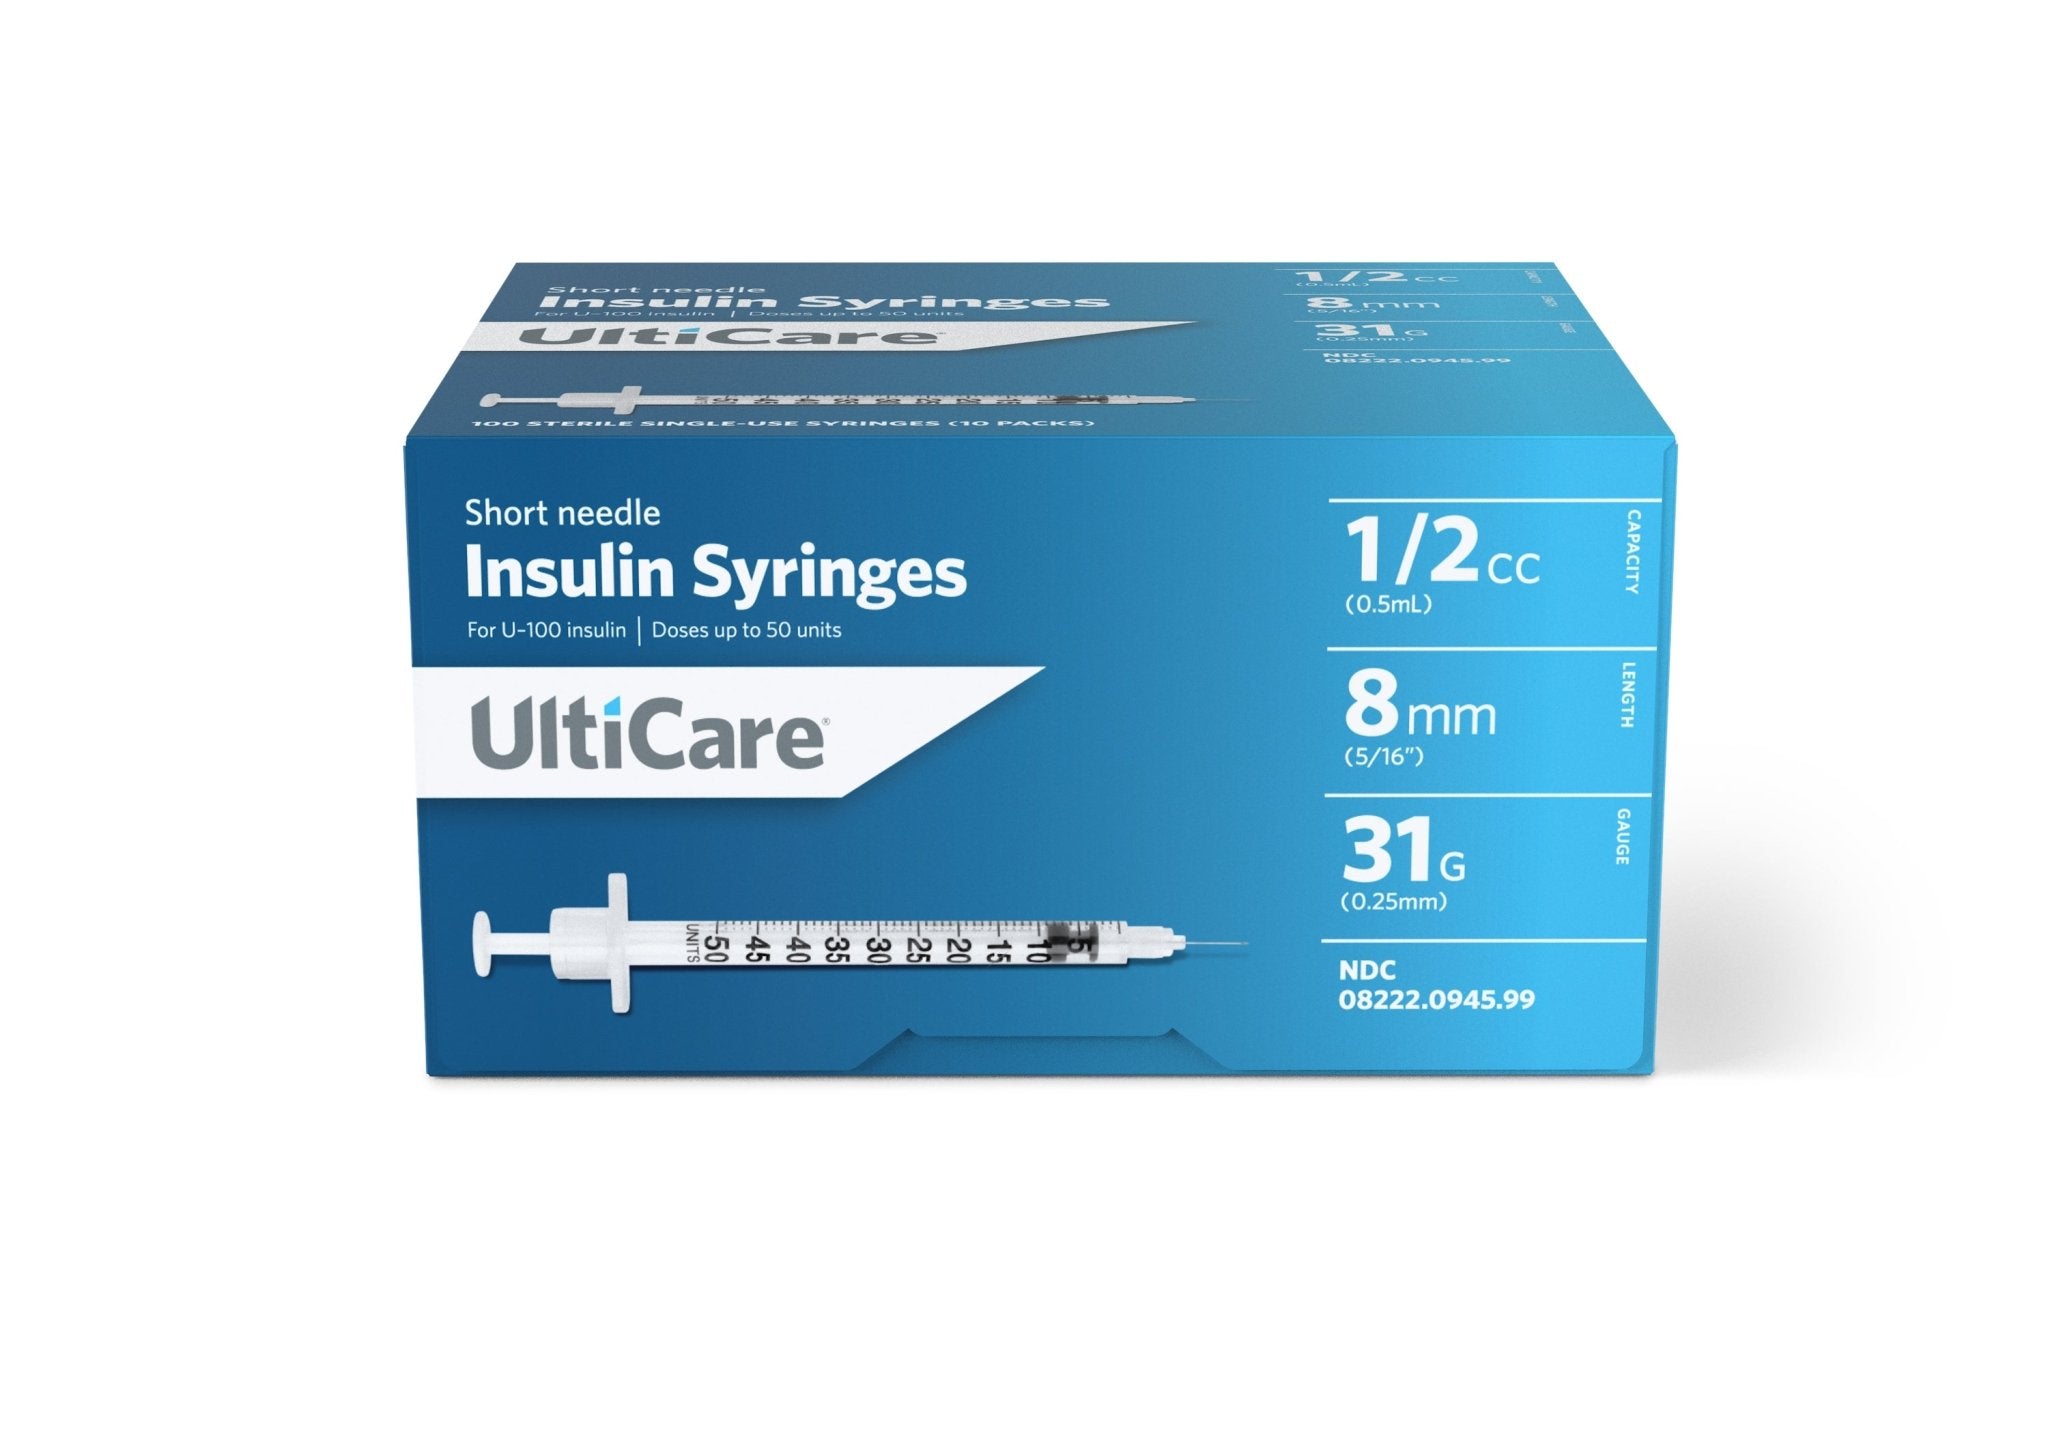 BX/100 - Ultimed UltiCare&trade; Short Needle Insulin Syringe 1/2cc, 31G x 5/16" Needle - Best Buy Medical Supplies